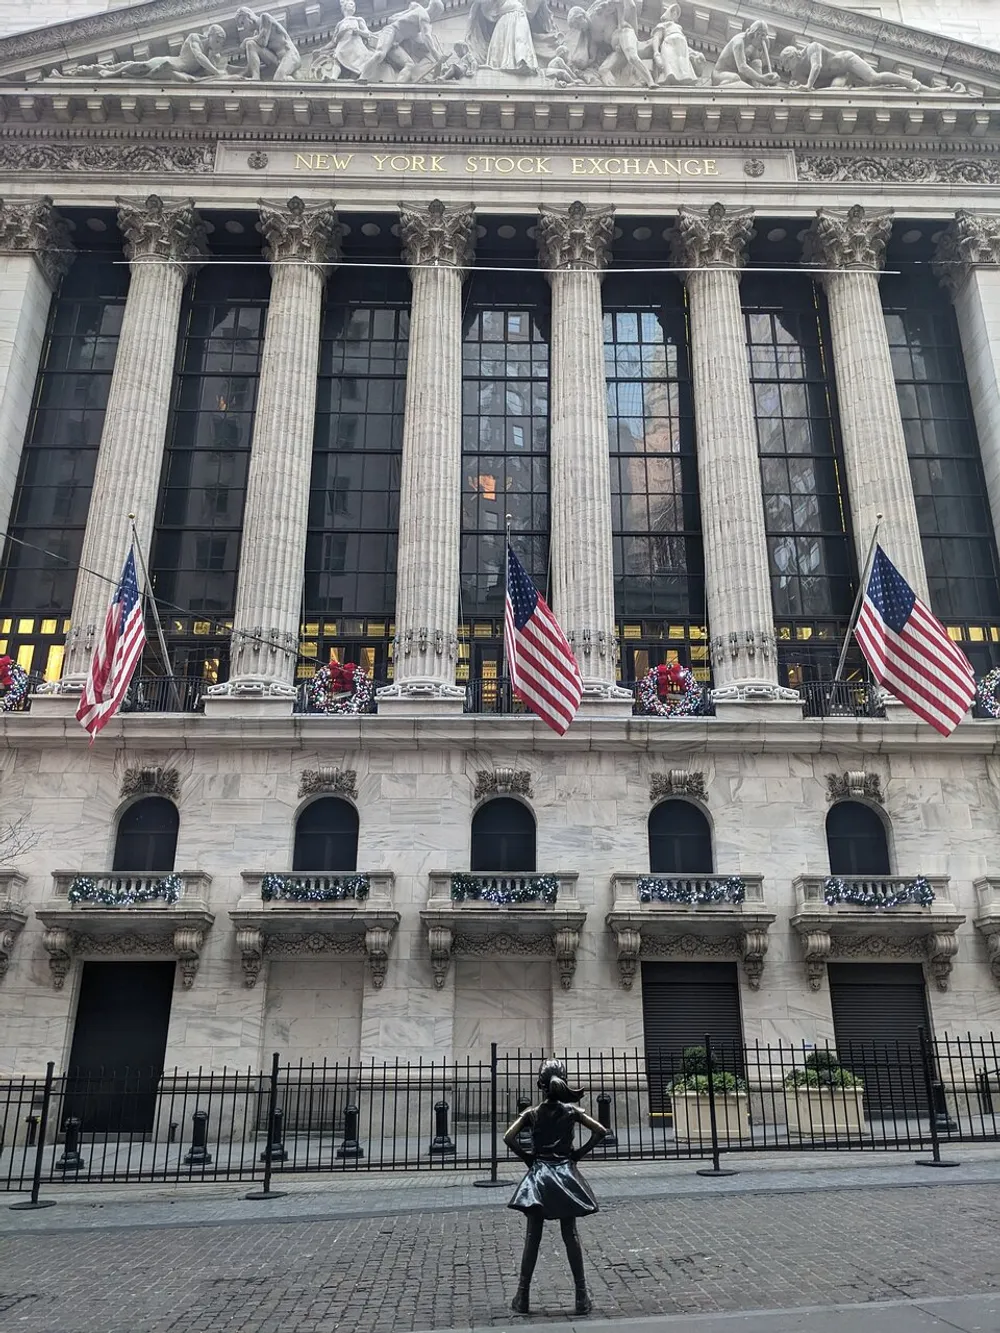 The image shows the New York Stock Exchange building with American flags and the Fearless Girl statue facing it symbolizing defiance and empowerment in the financial district